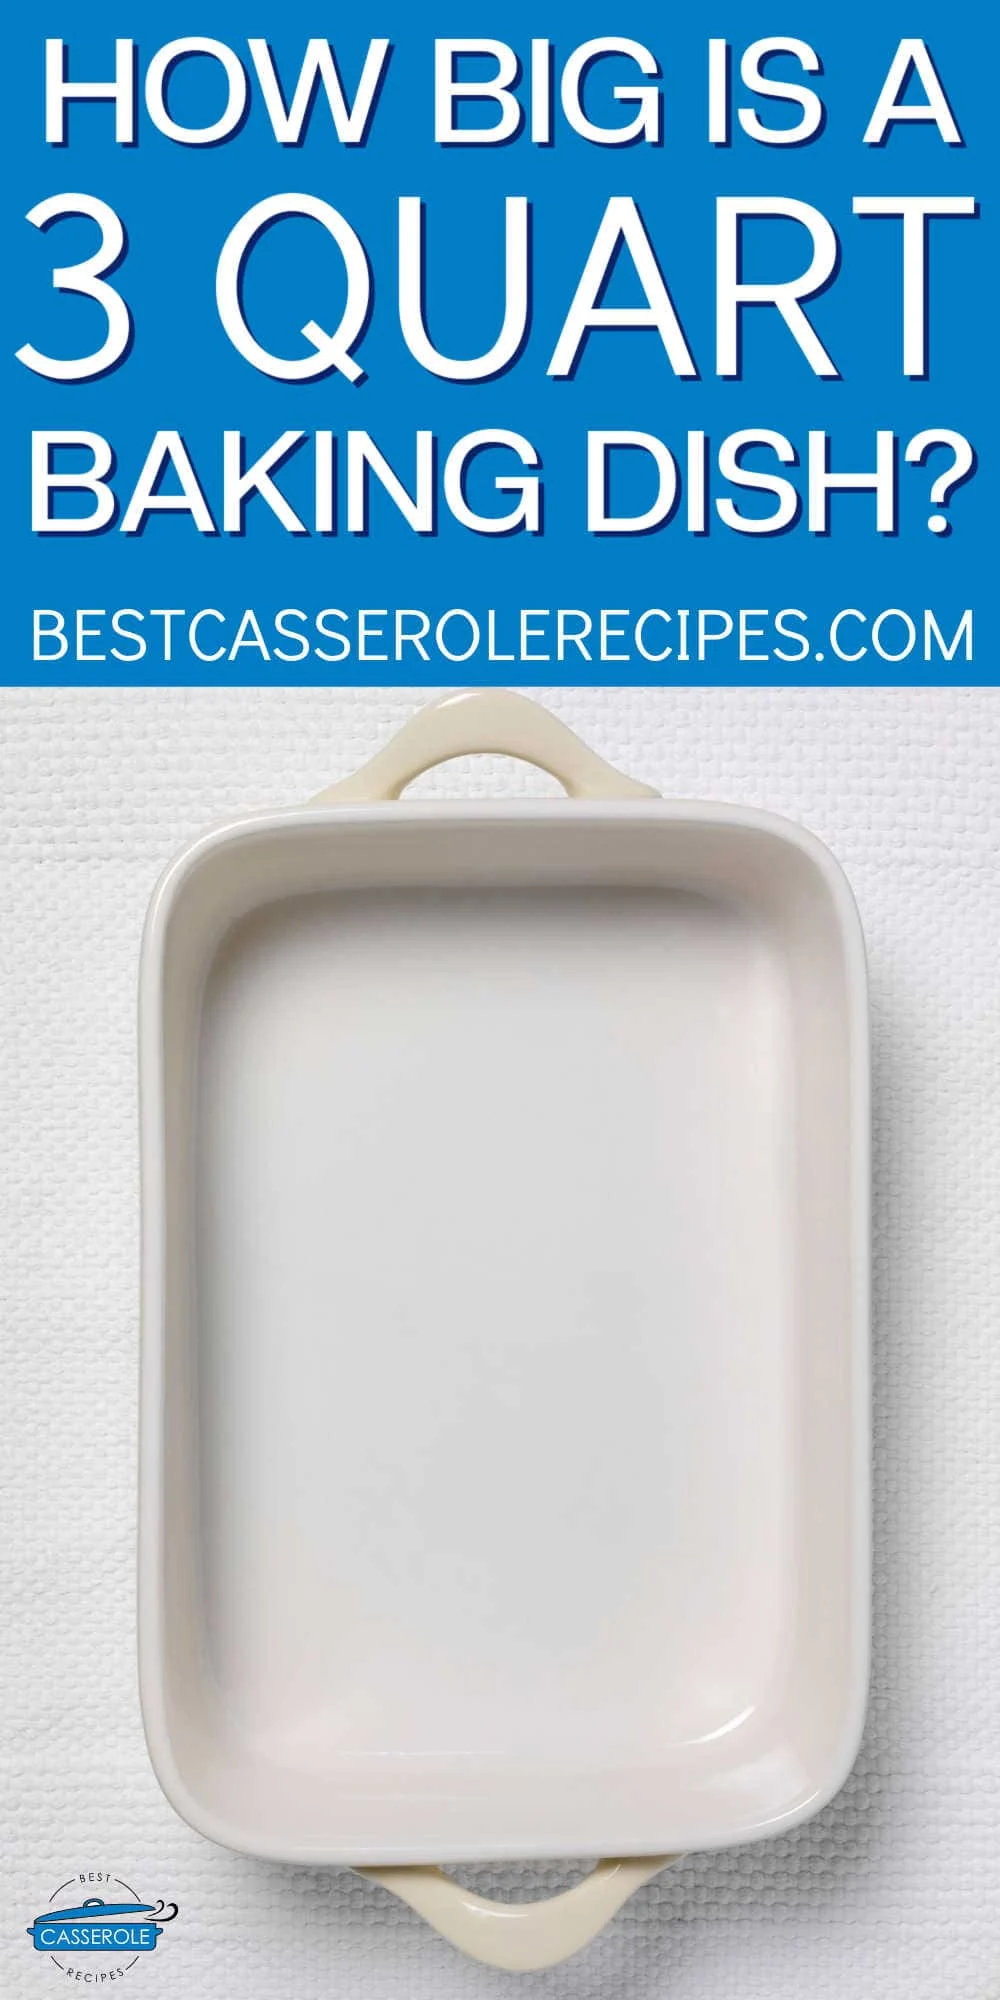 empty white baking dish with blue banner and white text